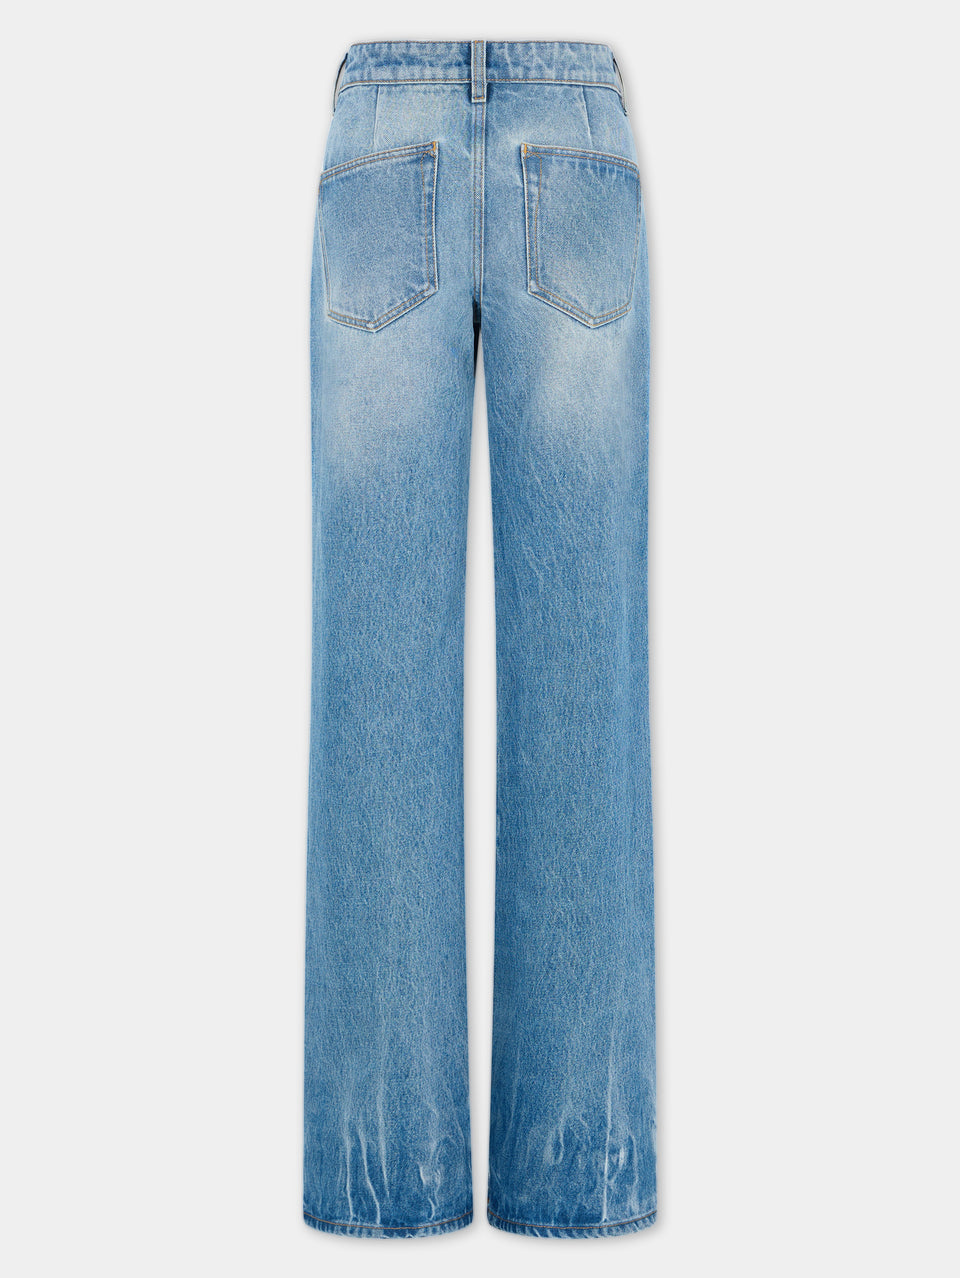 Flared jeans embellished with 1969 discs